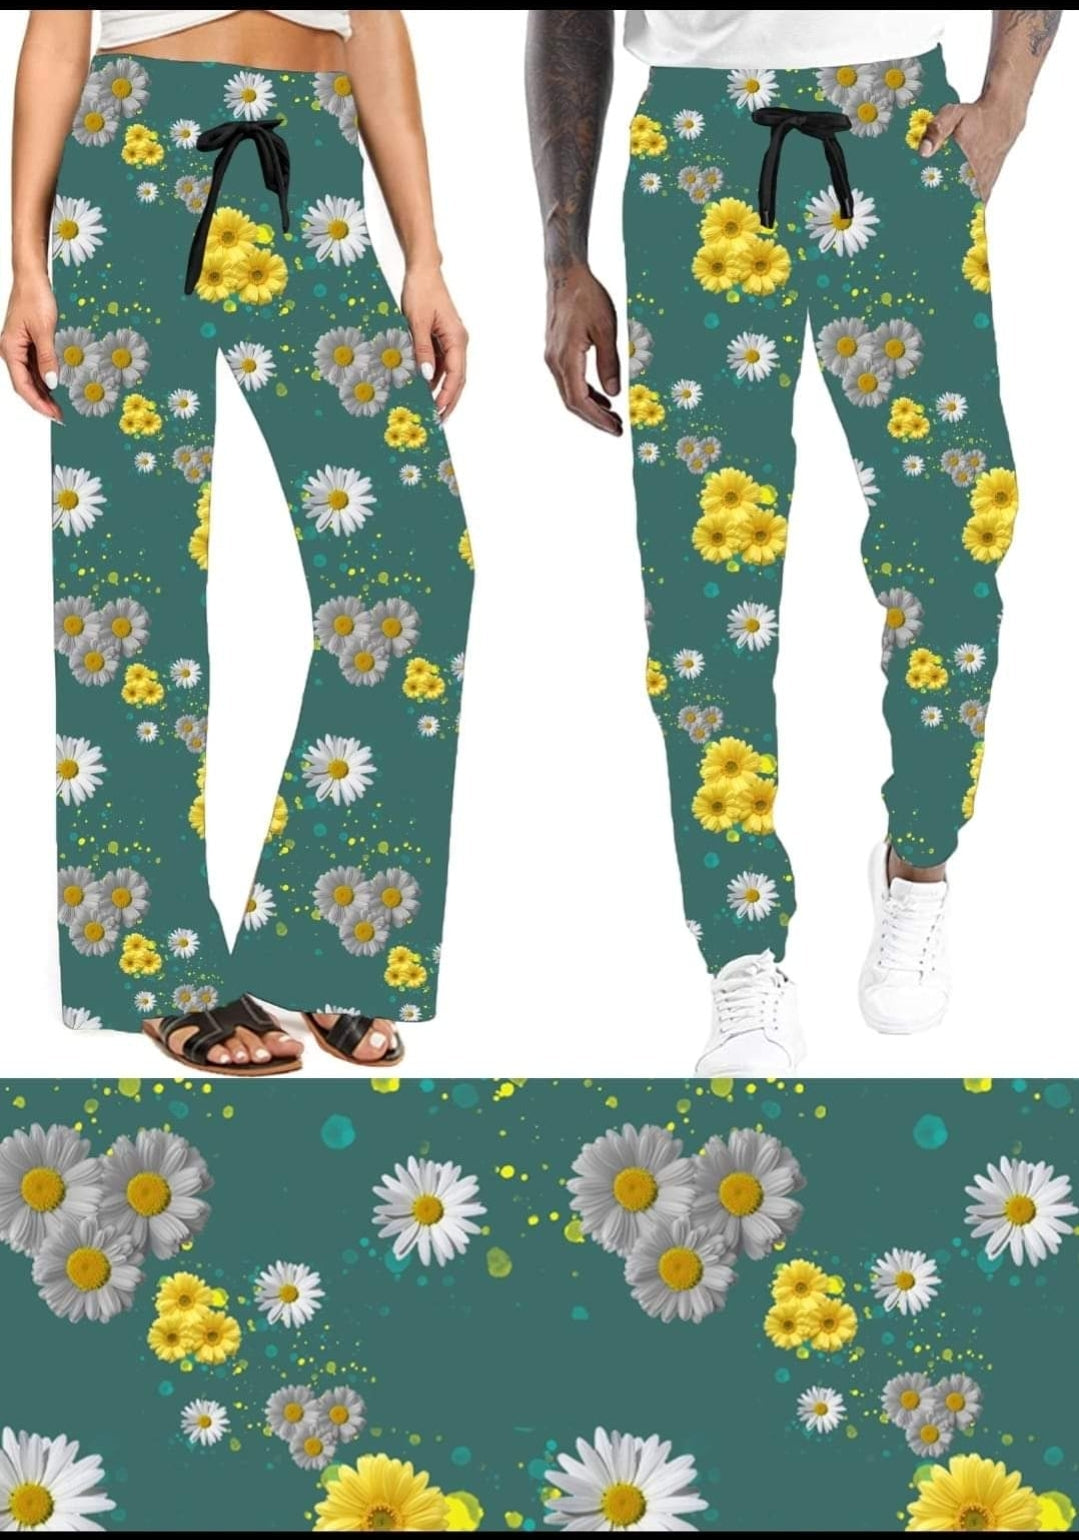 Daisy Leggings and Capris with pockets